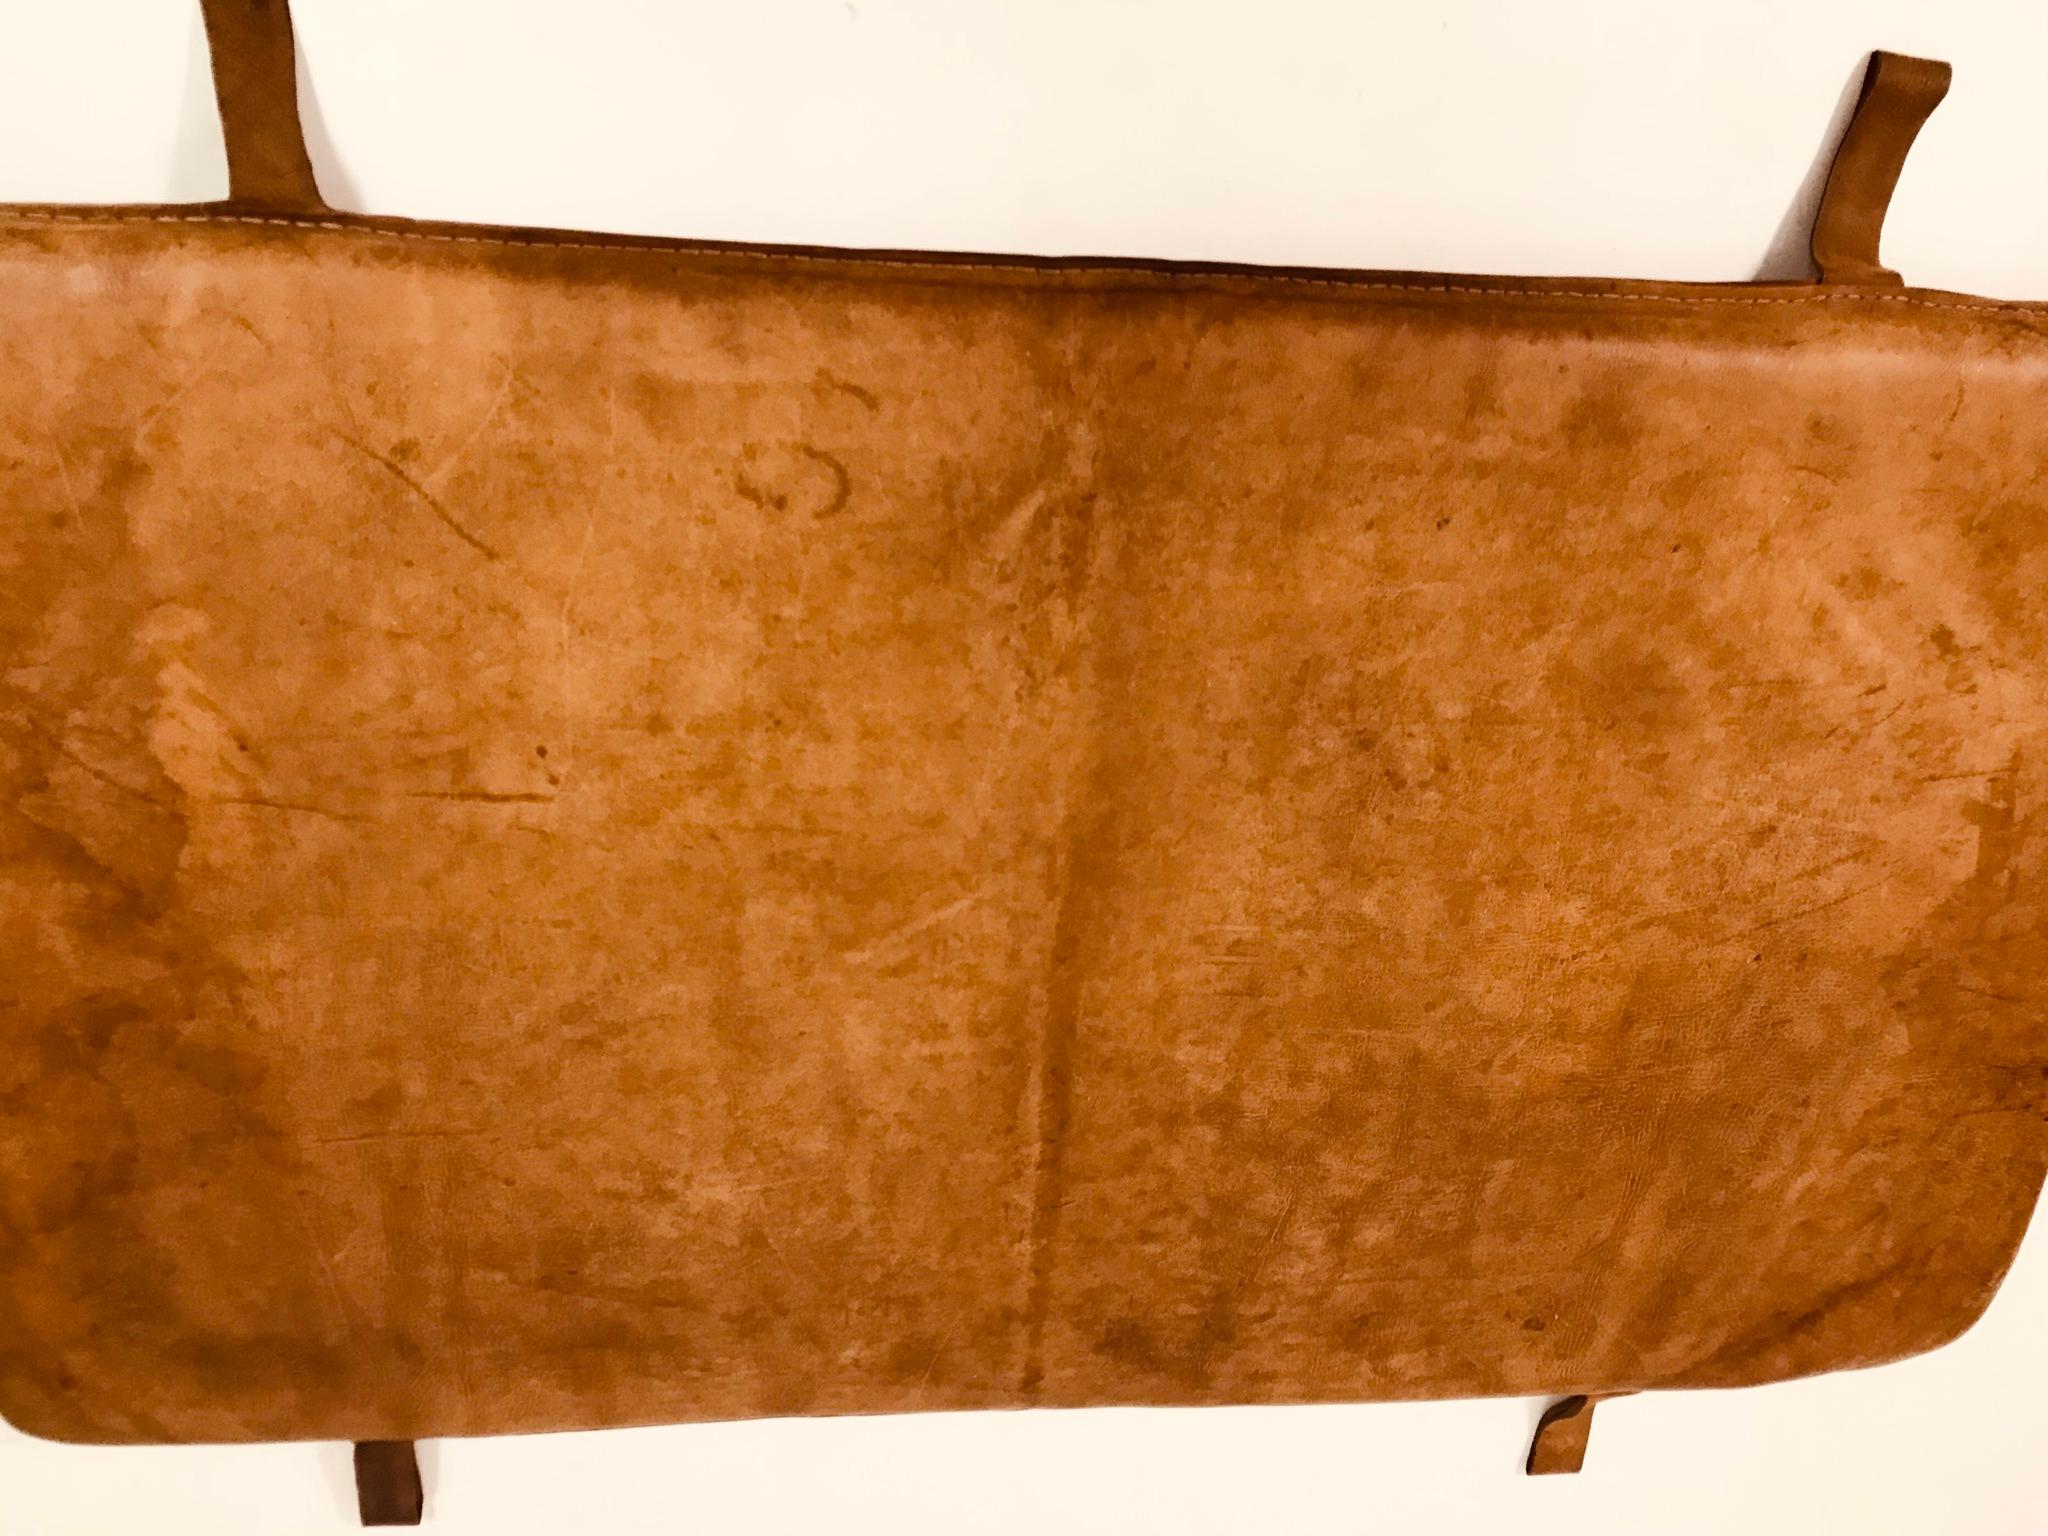 The mat has thick leather in original patina in a very good condition.